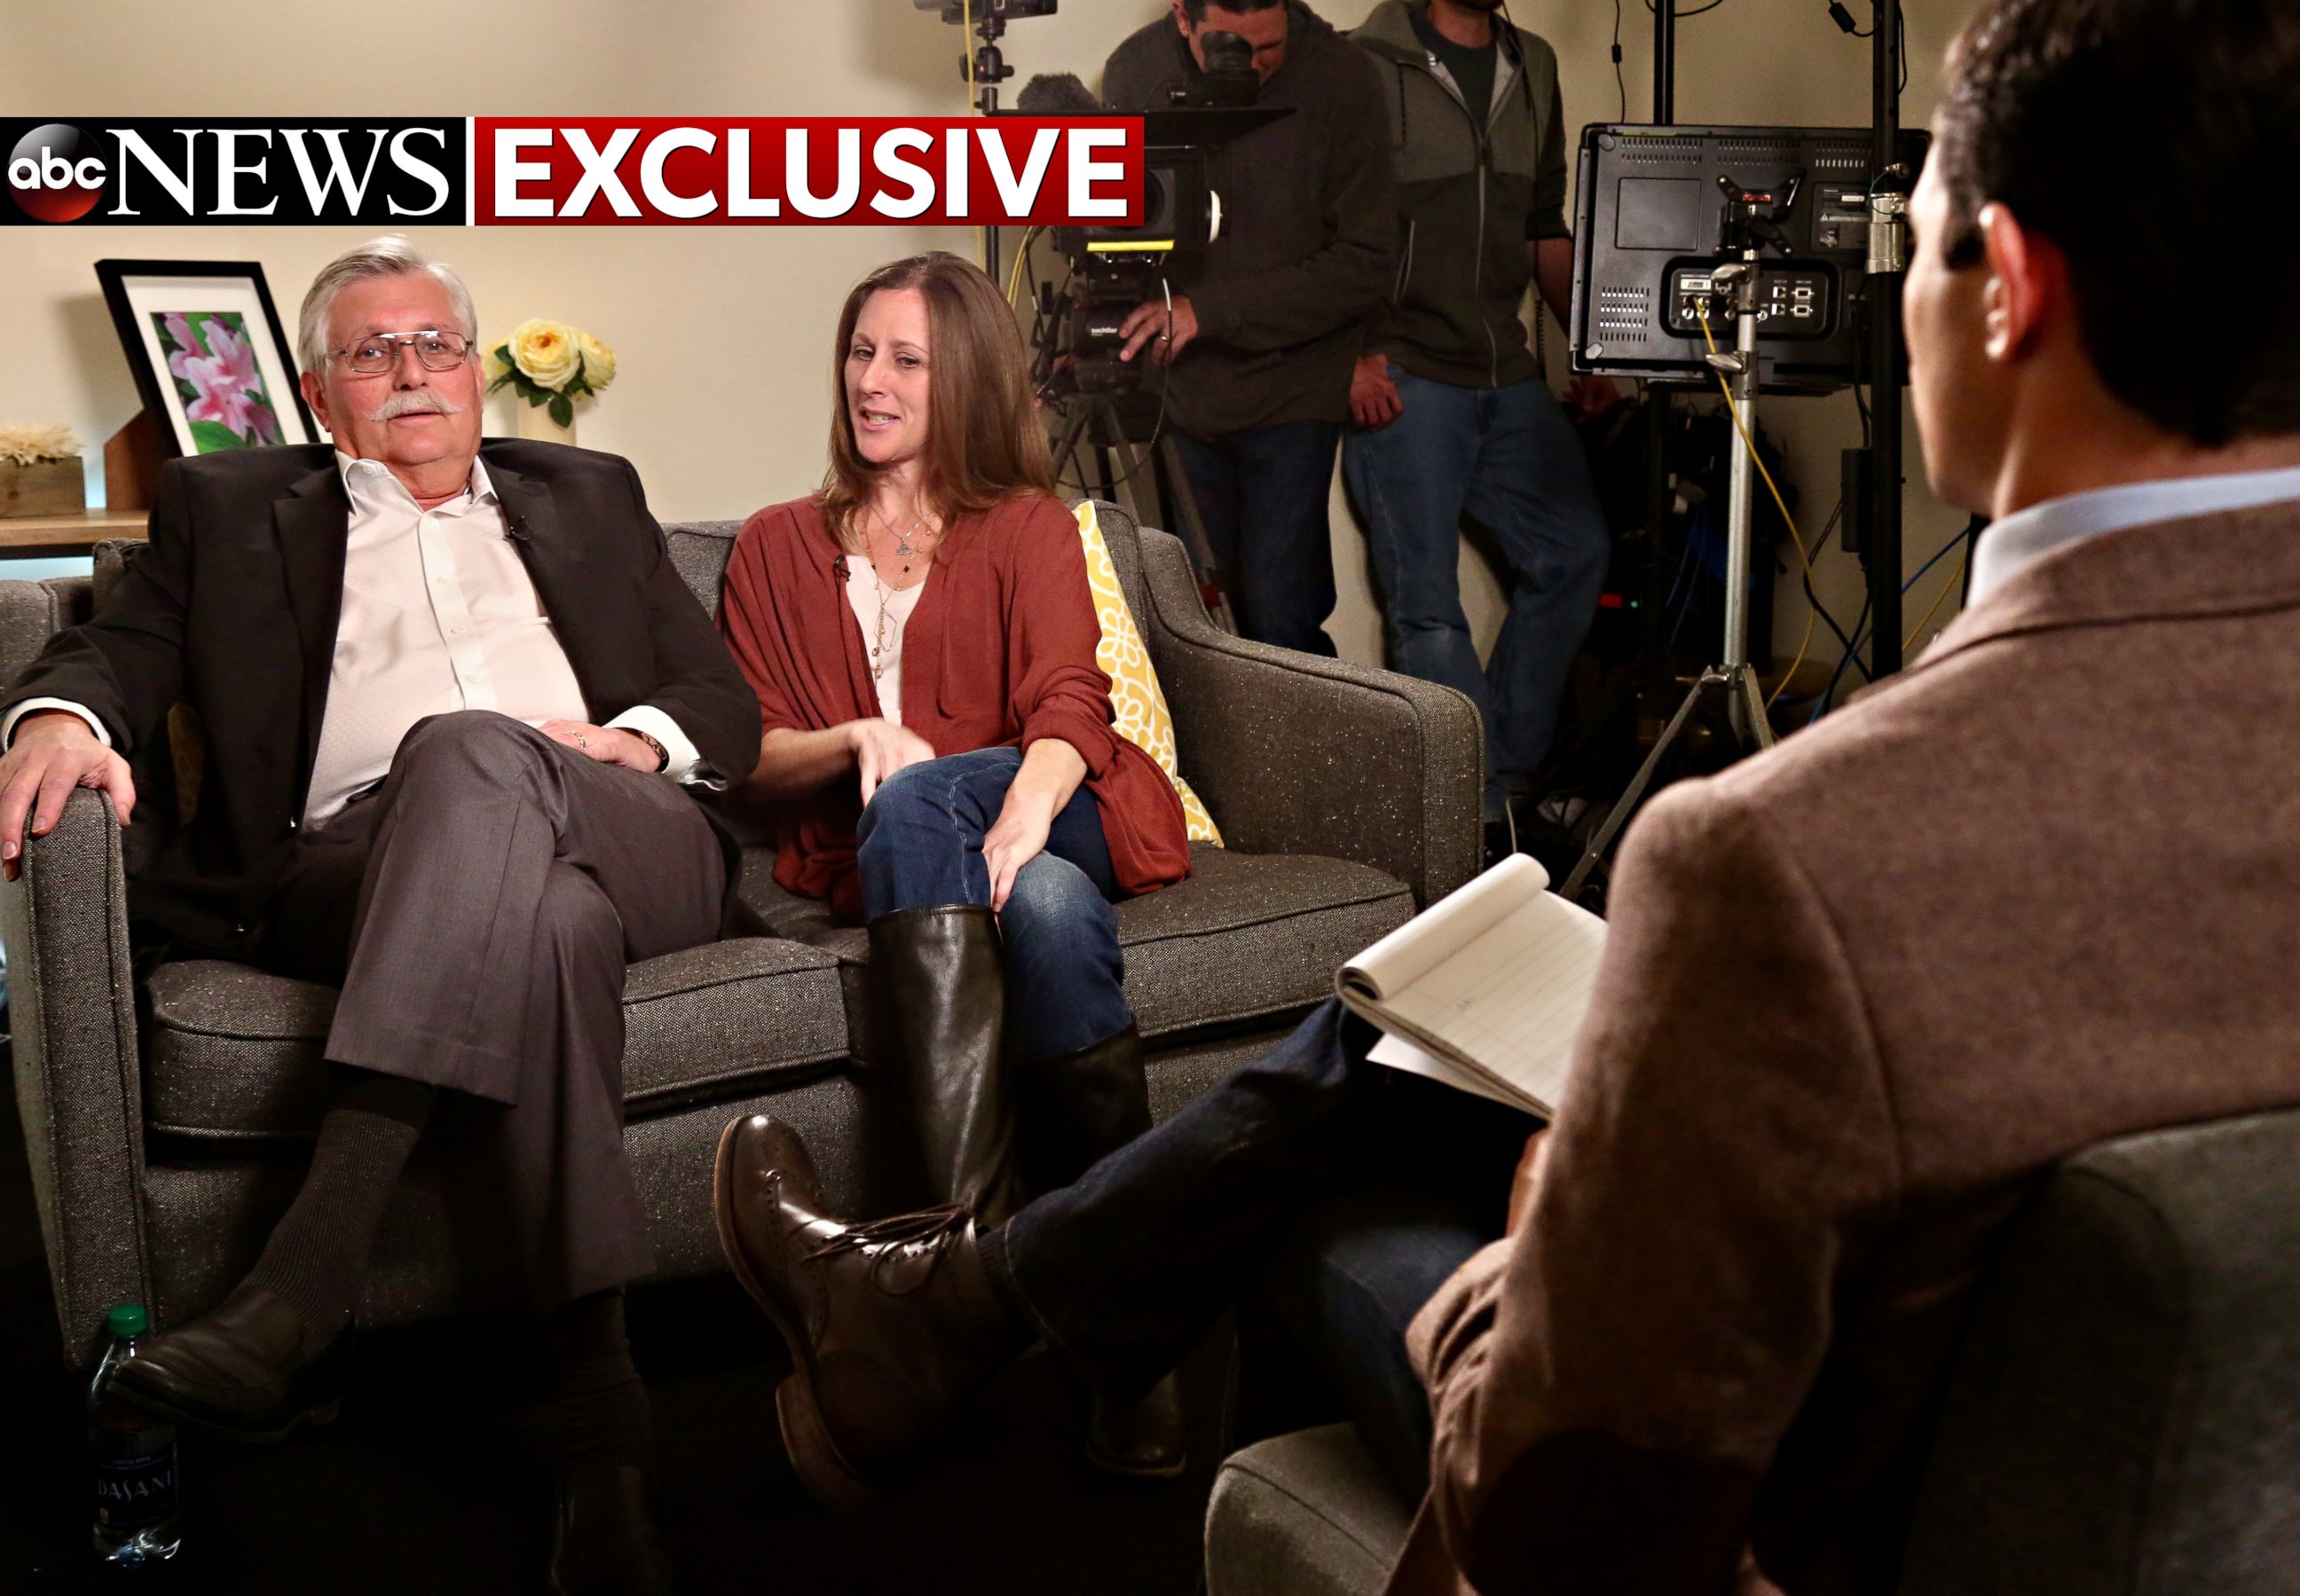 PHOTO: Fred and Kim Goldman speak out in an exclusive interview with "GMA" on the 20th anniversary of the judgment in the O.J. Simpson civil trial.
